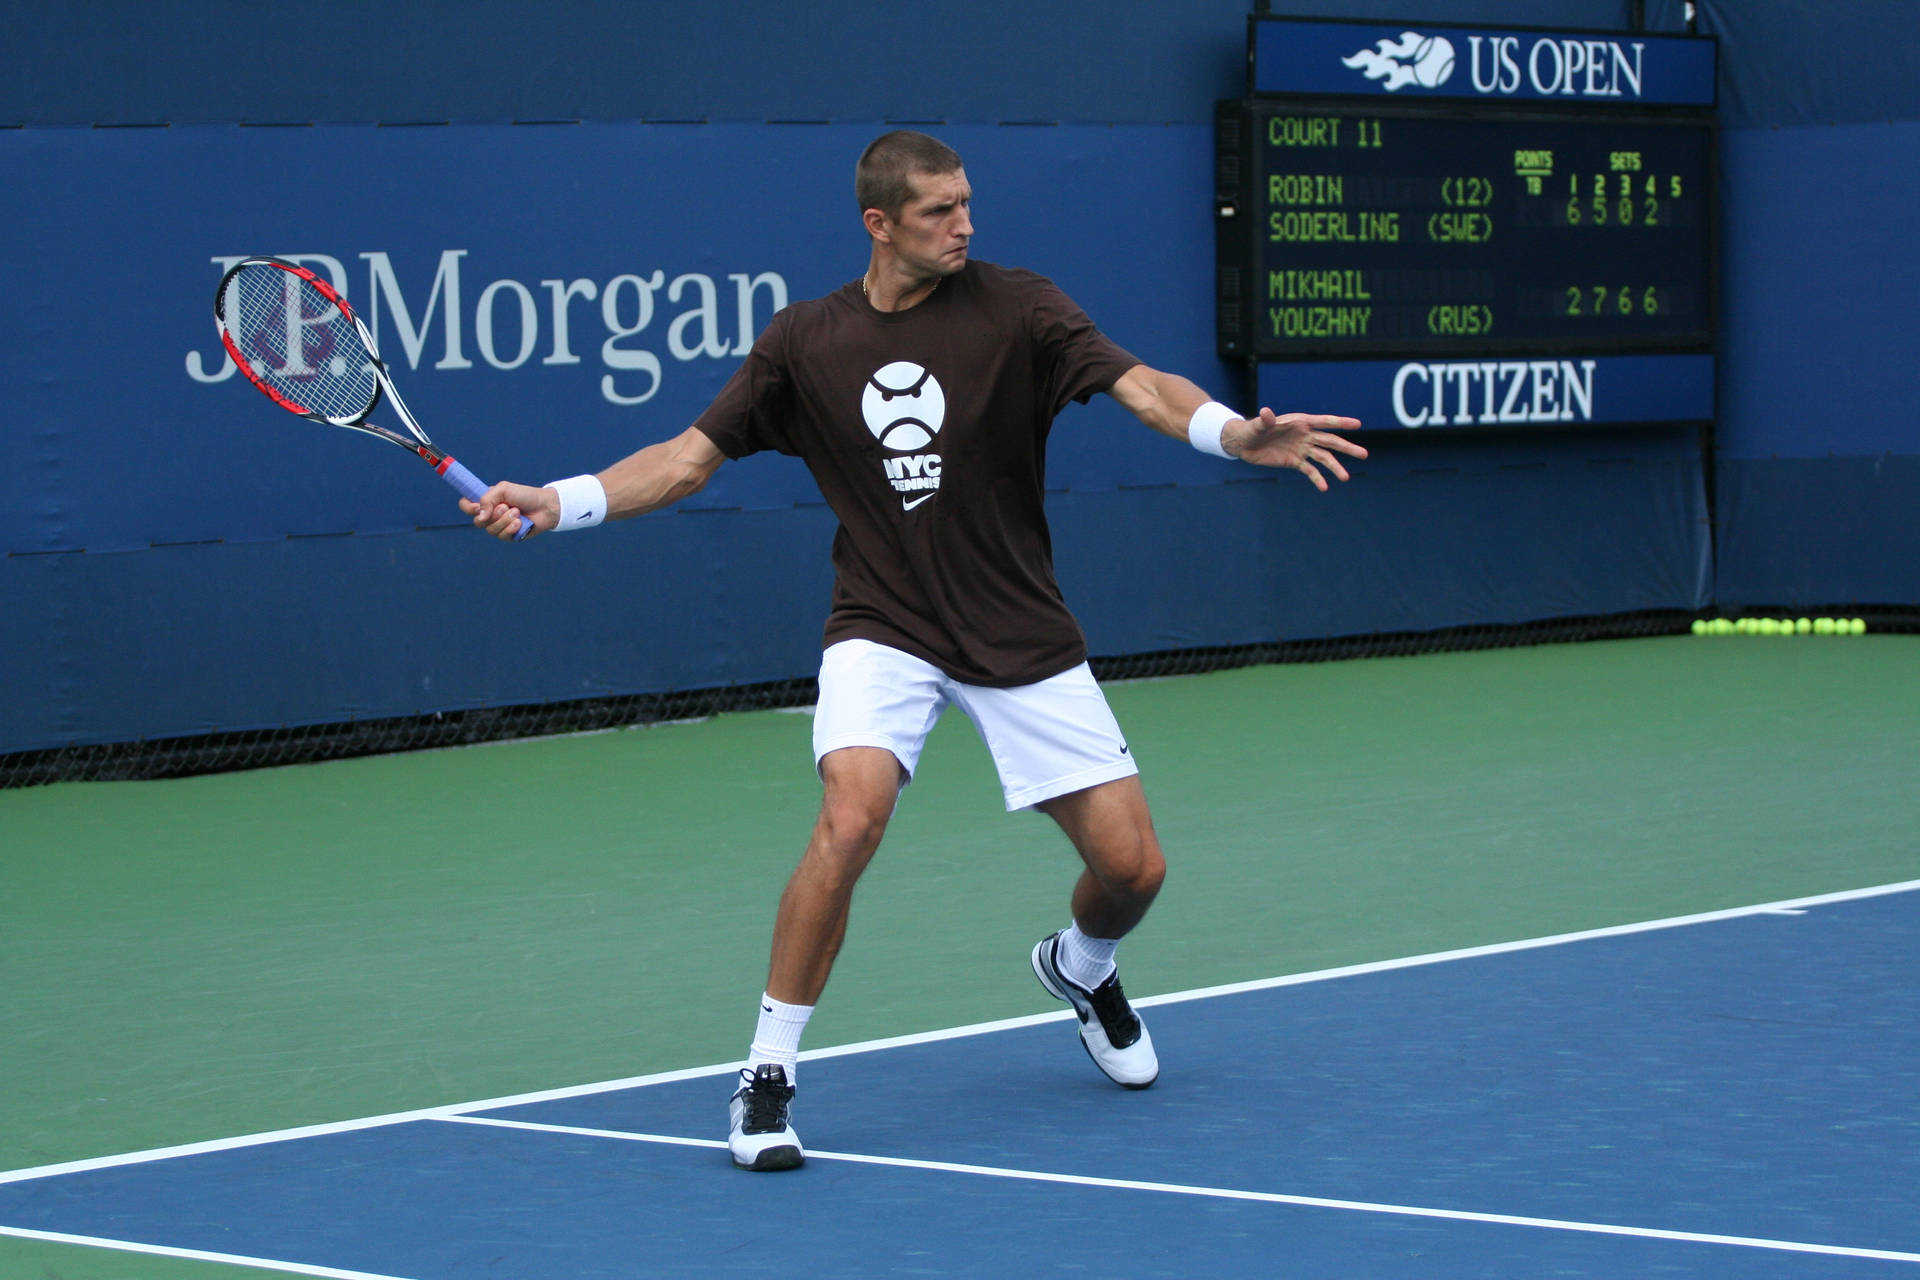 Max Mirnyi executing a strategic angling shot during the US open match Wallpaper